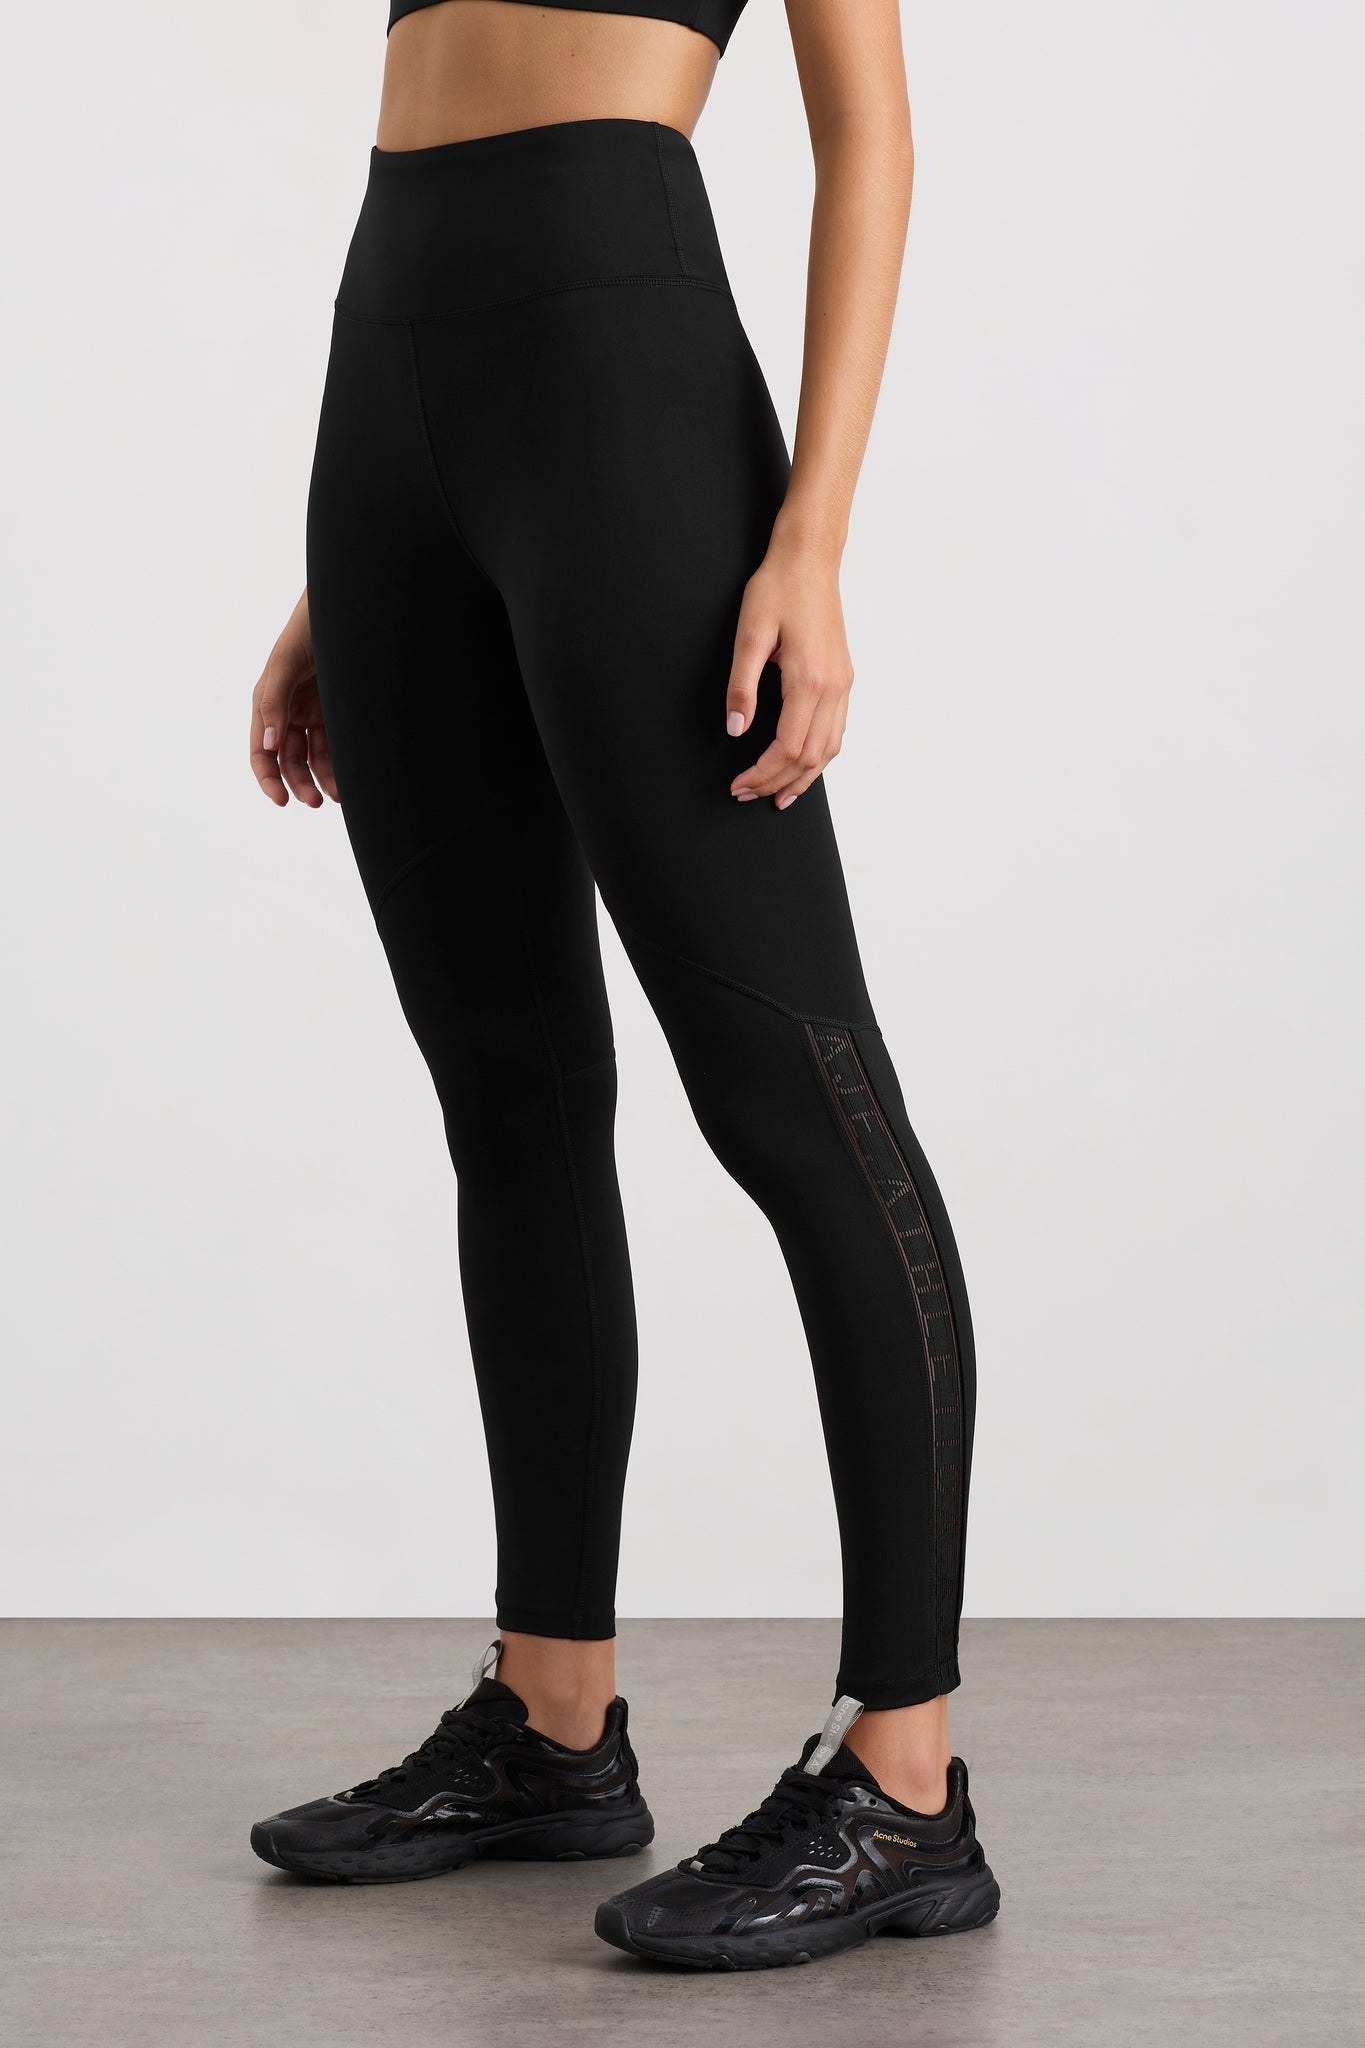 Buy Guess Athleisure Aline Tape Logo Leggings from Next Luxembourg